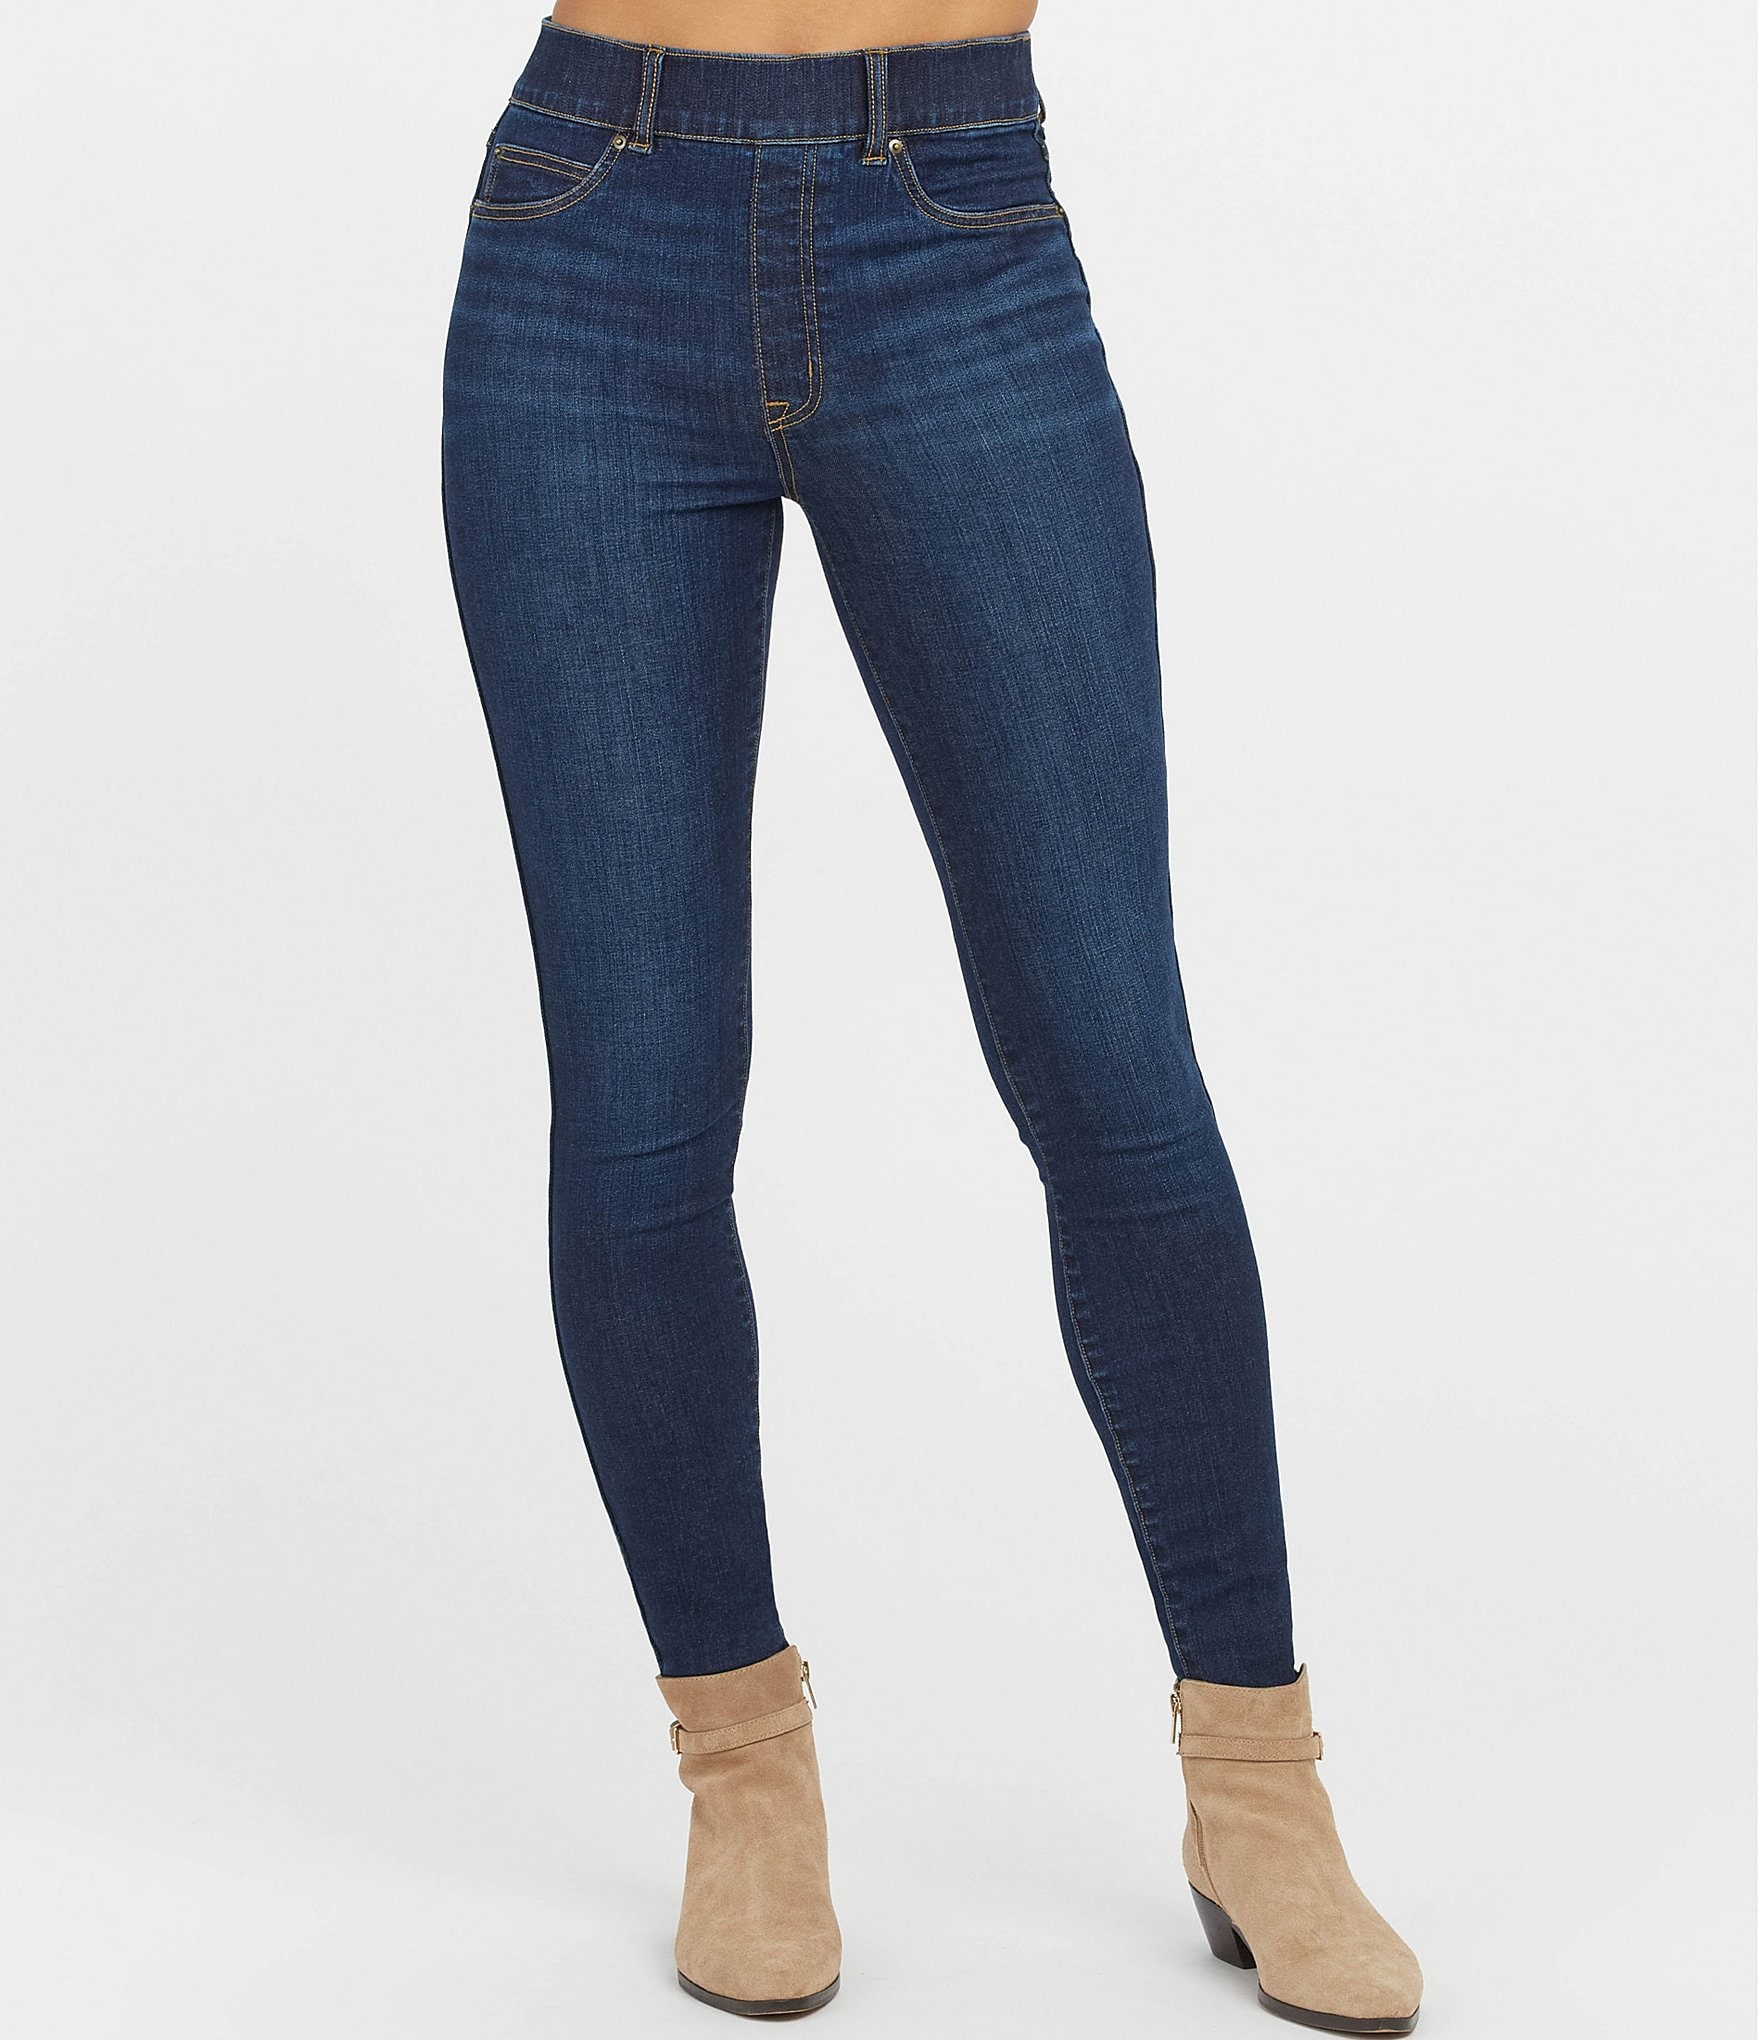 Spanx Ankle Length Skinny Jeans